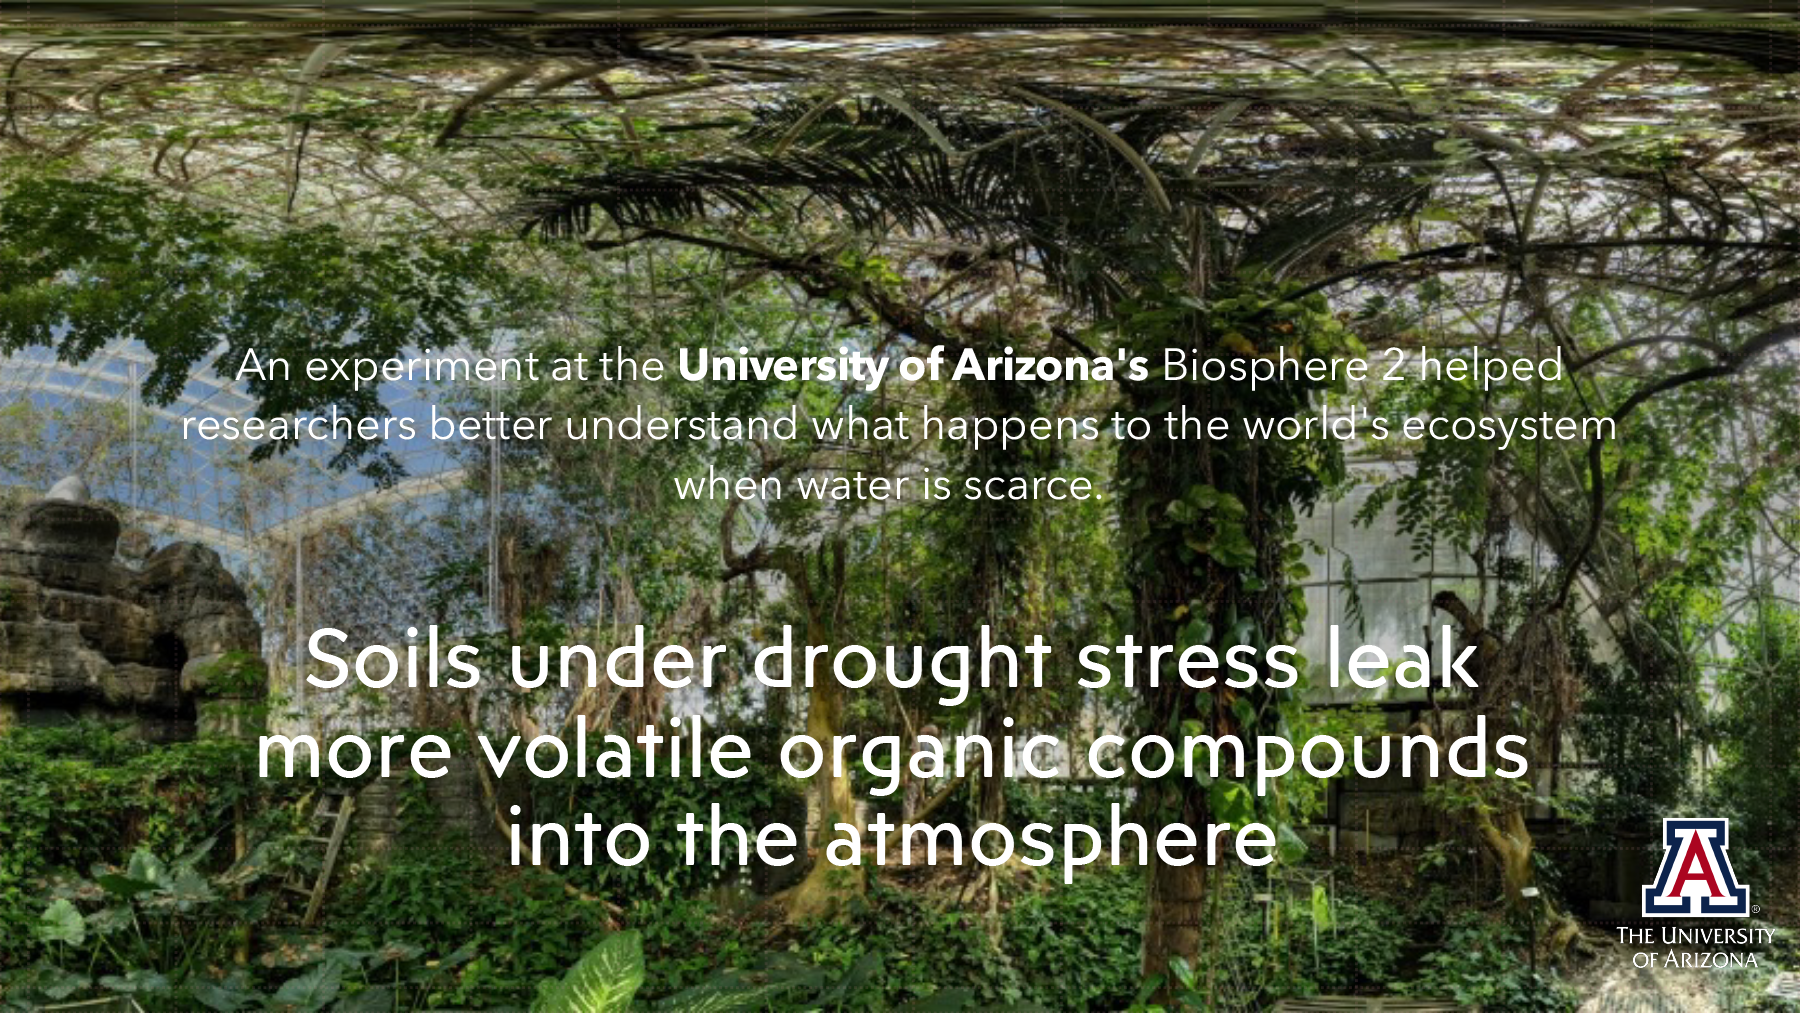 Soils under drought stress leak more volatile organic compounds into the atmosphere